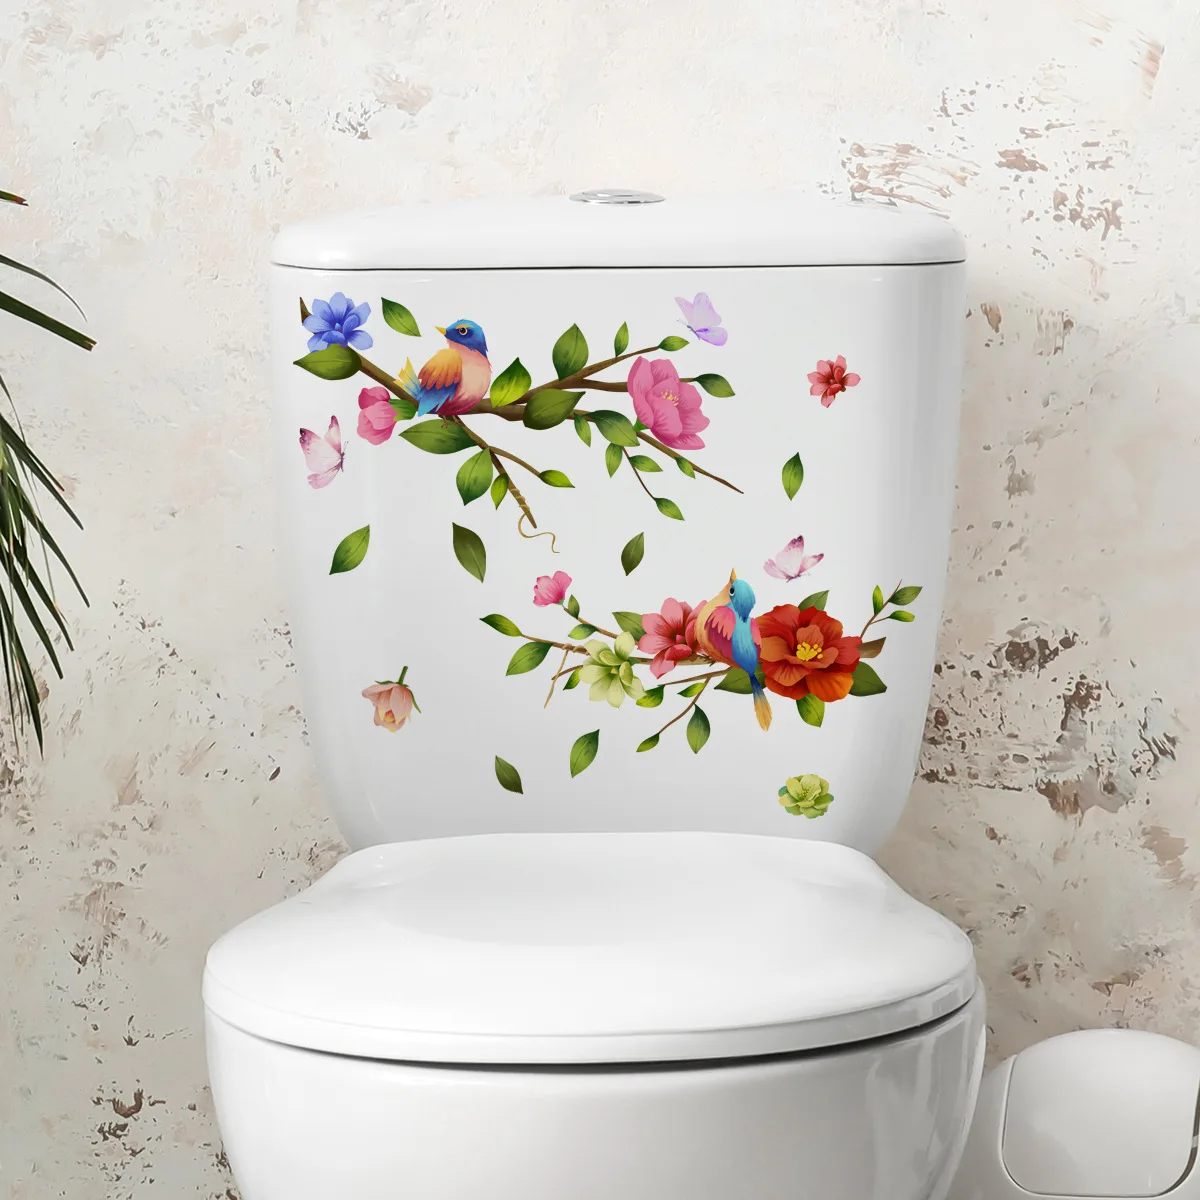 

Flower Toilet Lid Stickers Seat Cover Birds Decals Bathroom Decor Waterproof WC Peel Stick PVC Art Removeable Home Decoration